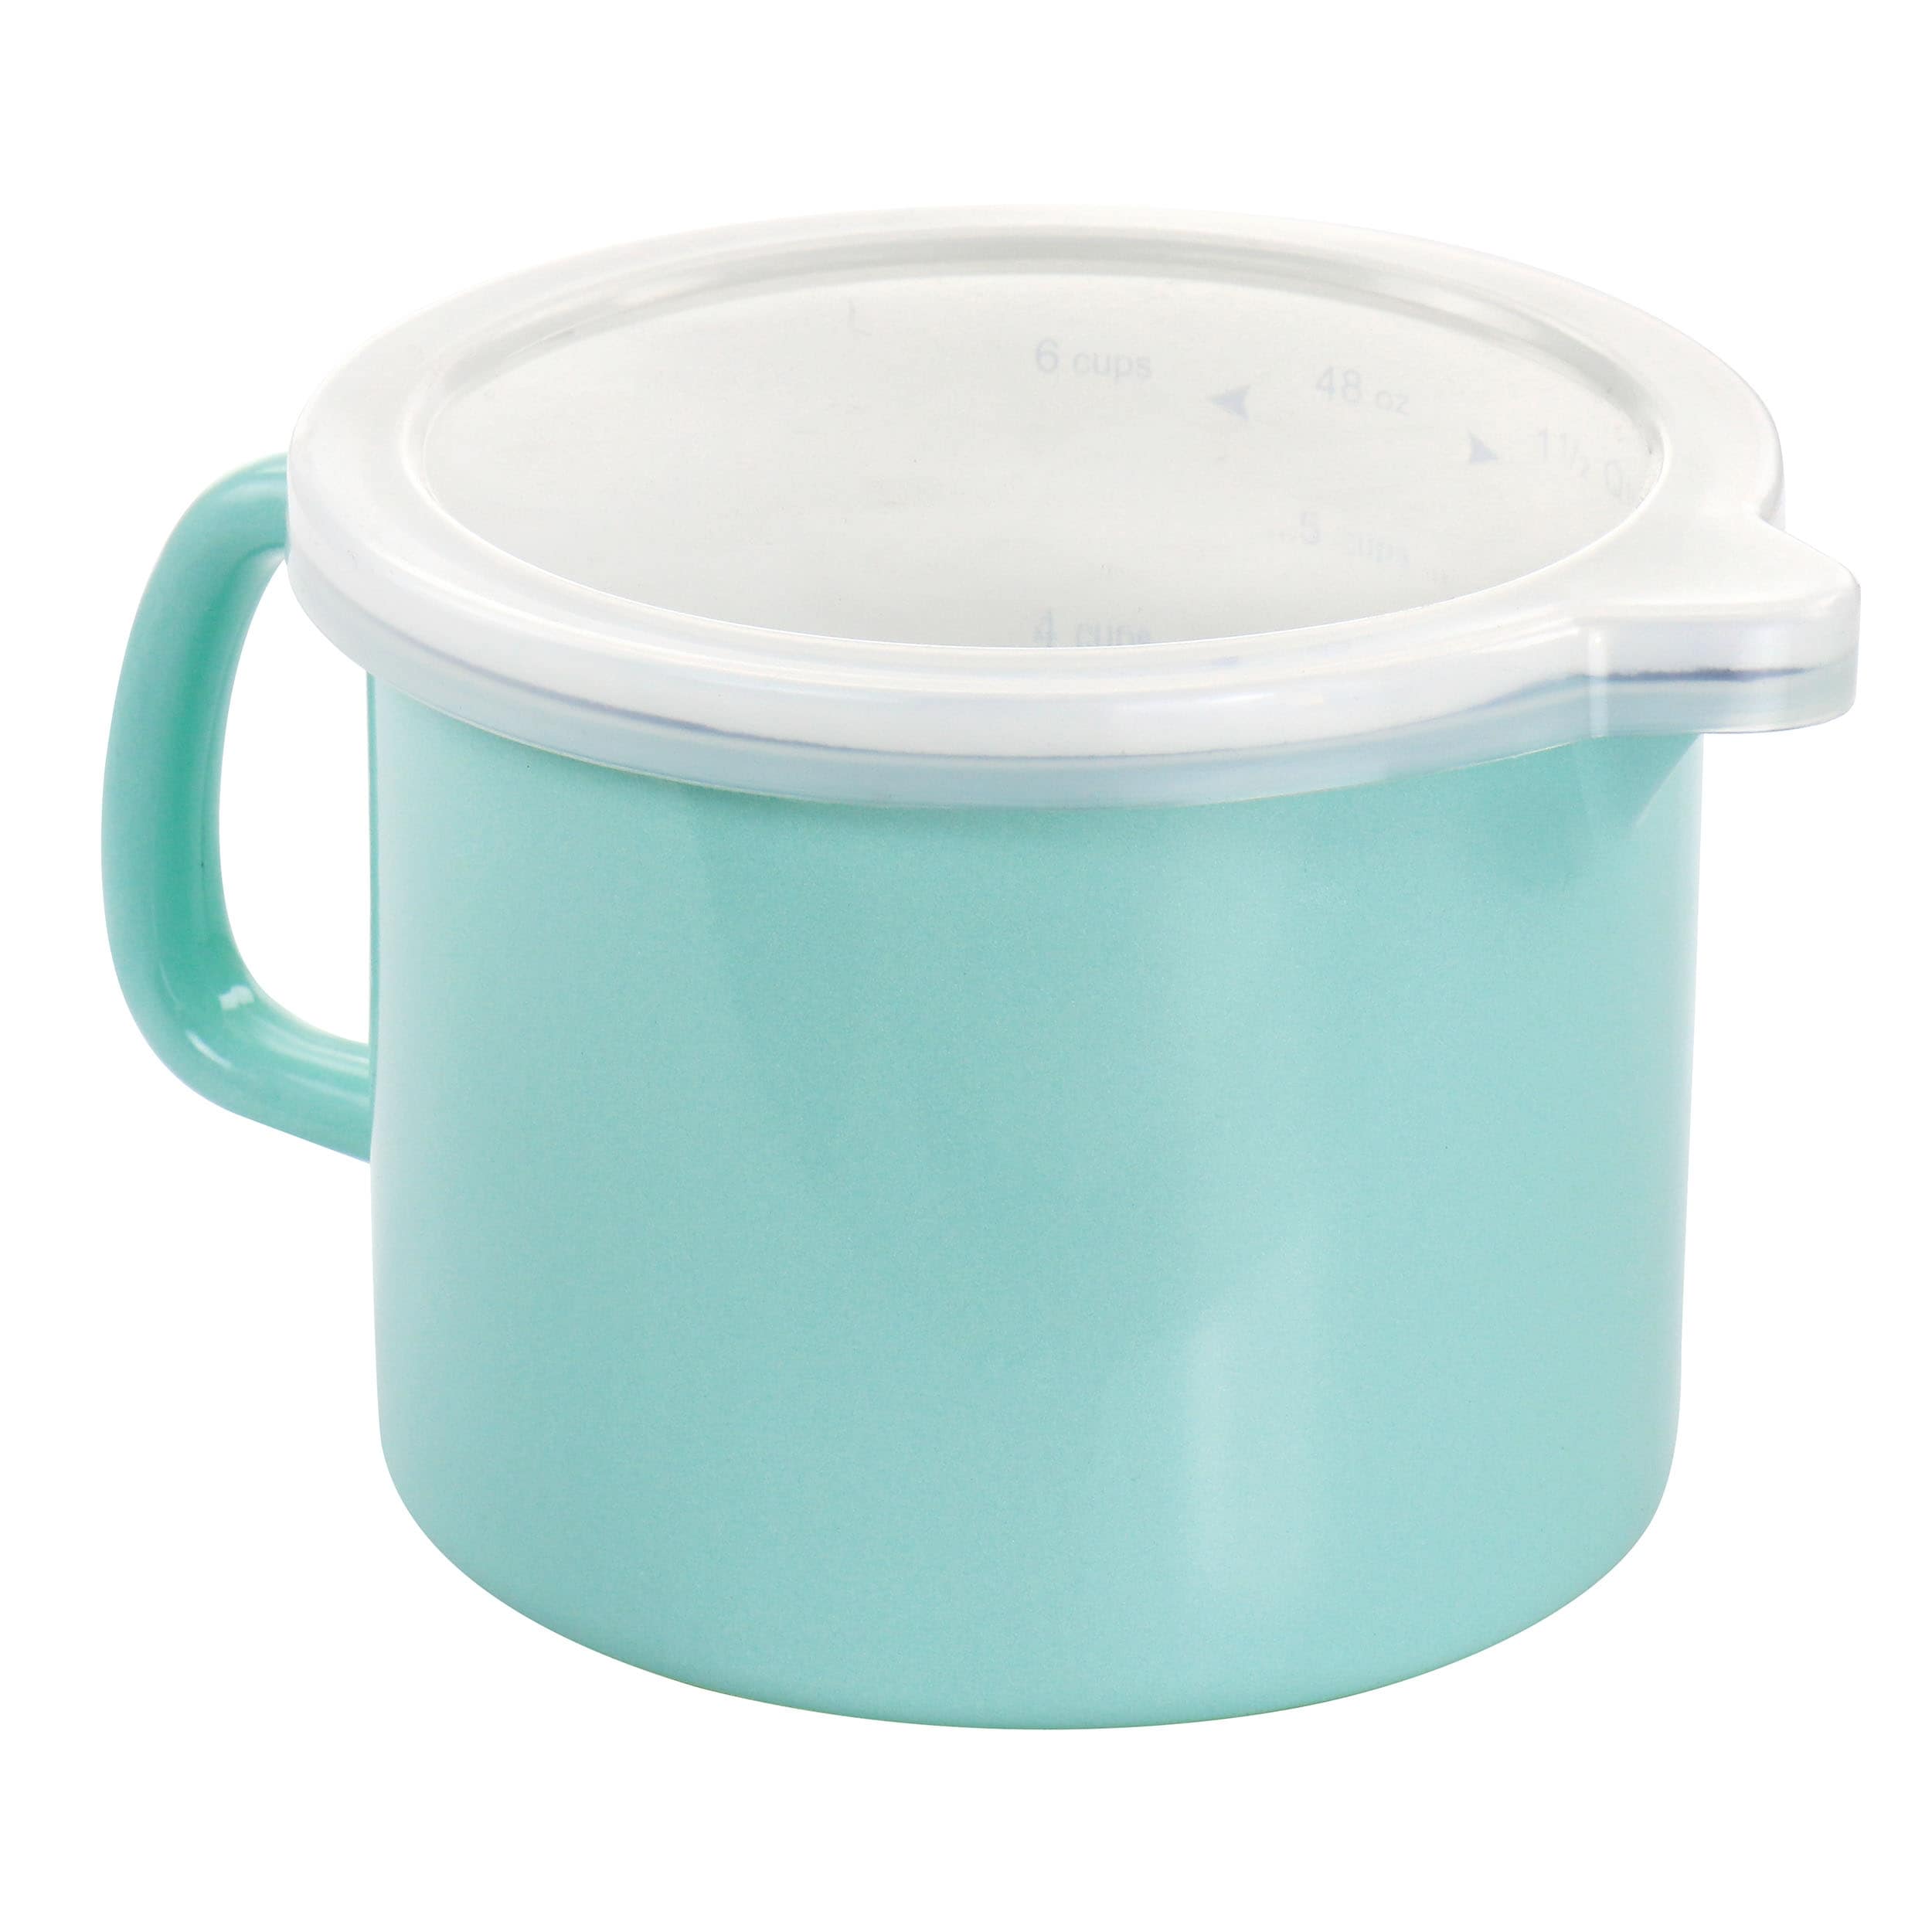 https://ak1.ostkcdn.com/images/products/is/images/direct/23b271cbbd9db90758509b90c8774e7cdbdc807a/6-Cup-Enamel-on-Steel-Measuring-Cup.jpg